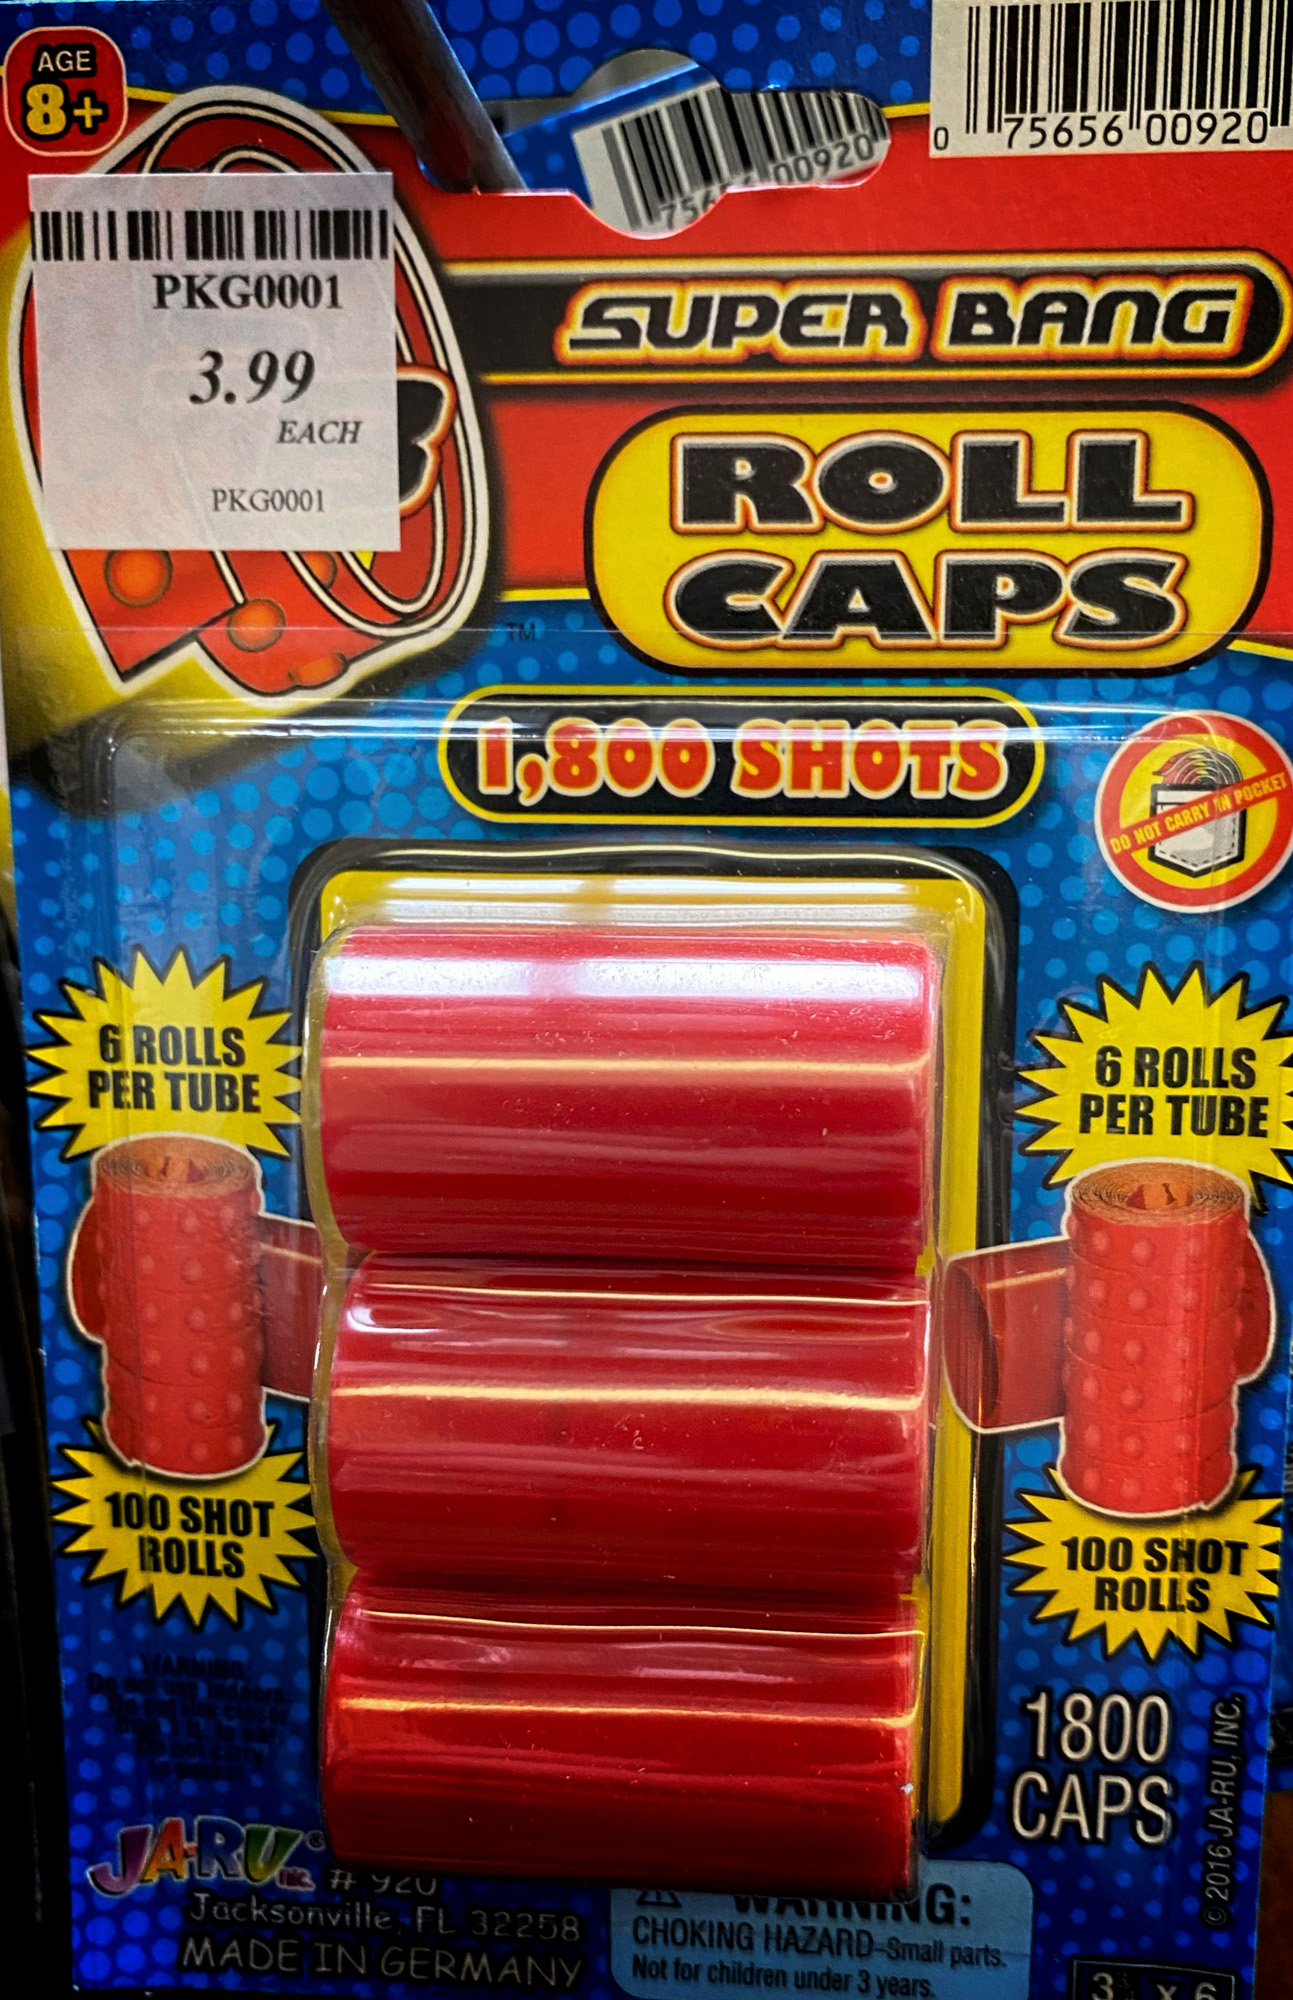 Cap guns and caps like we used to have as kids